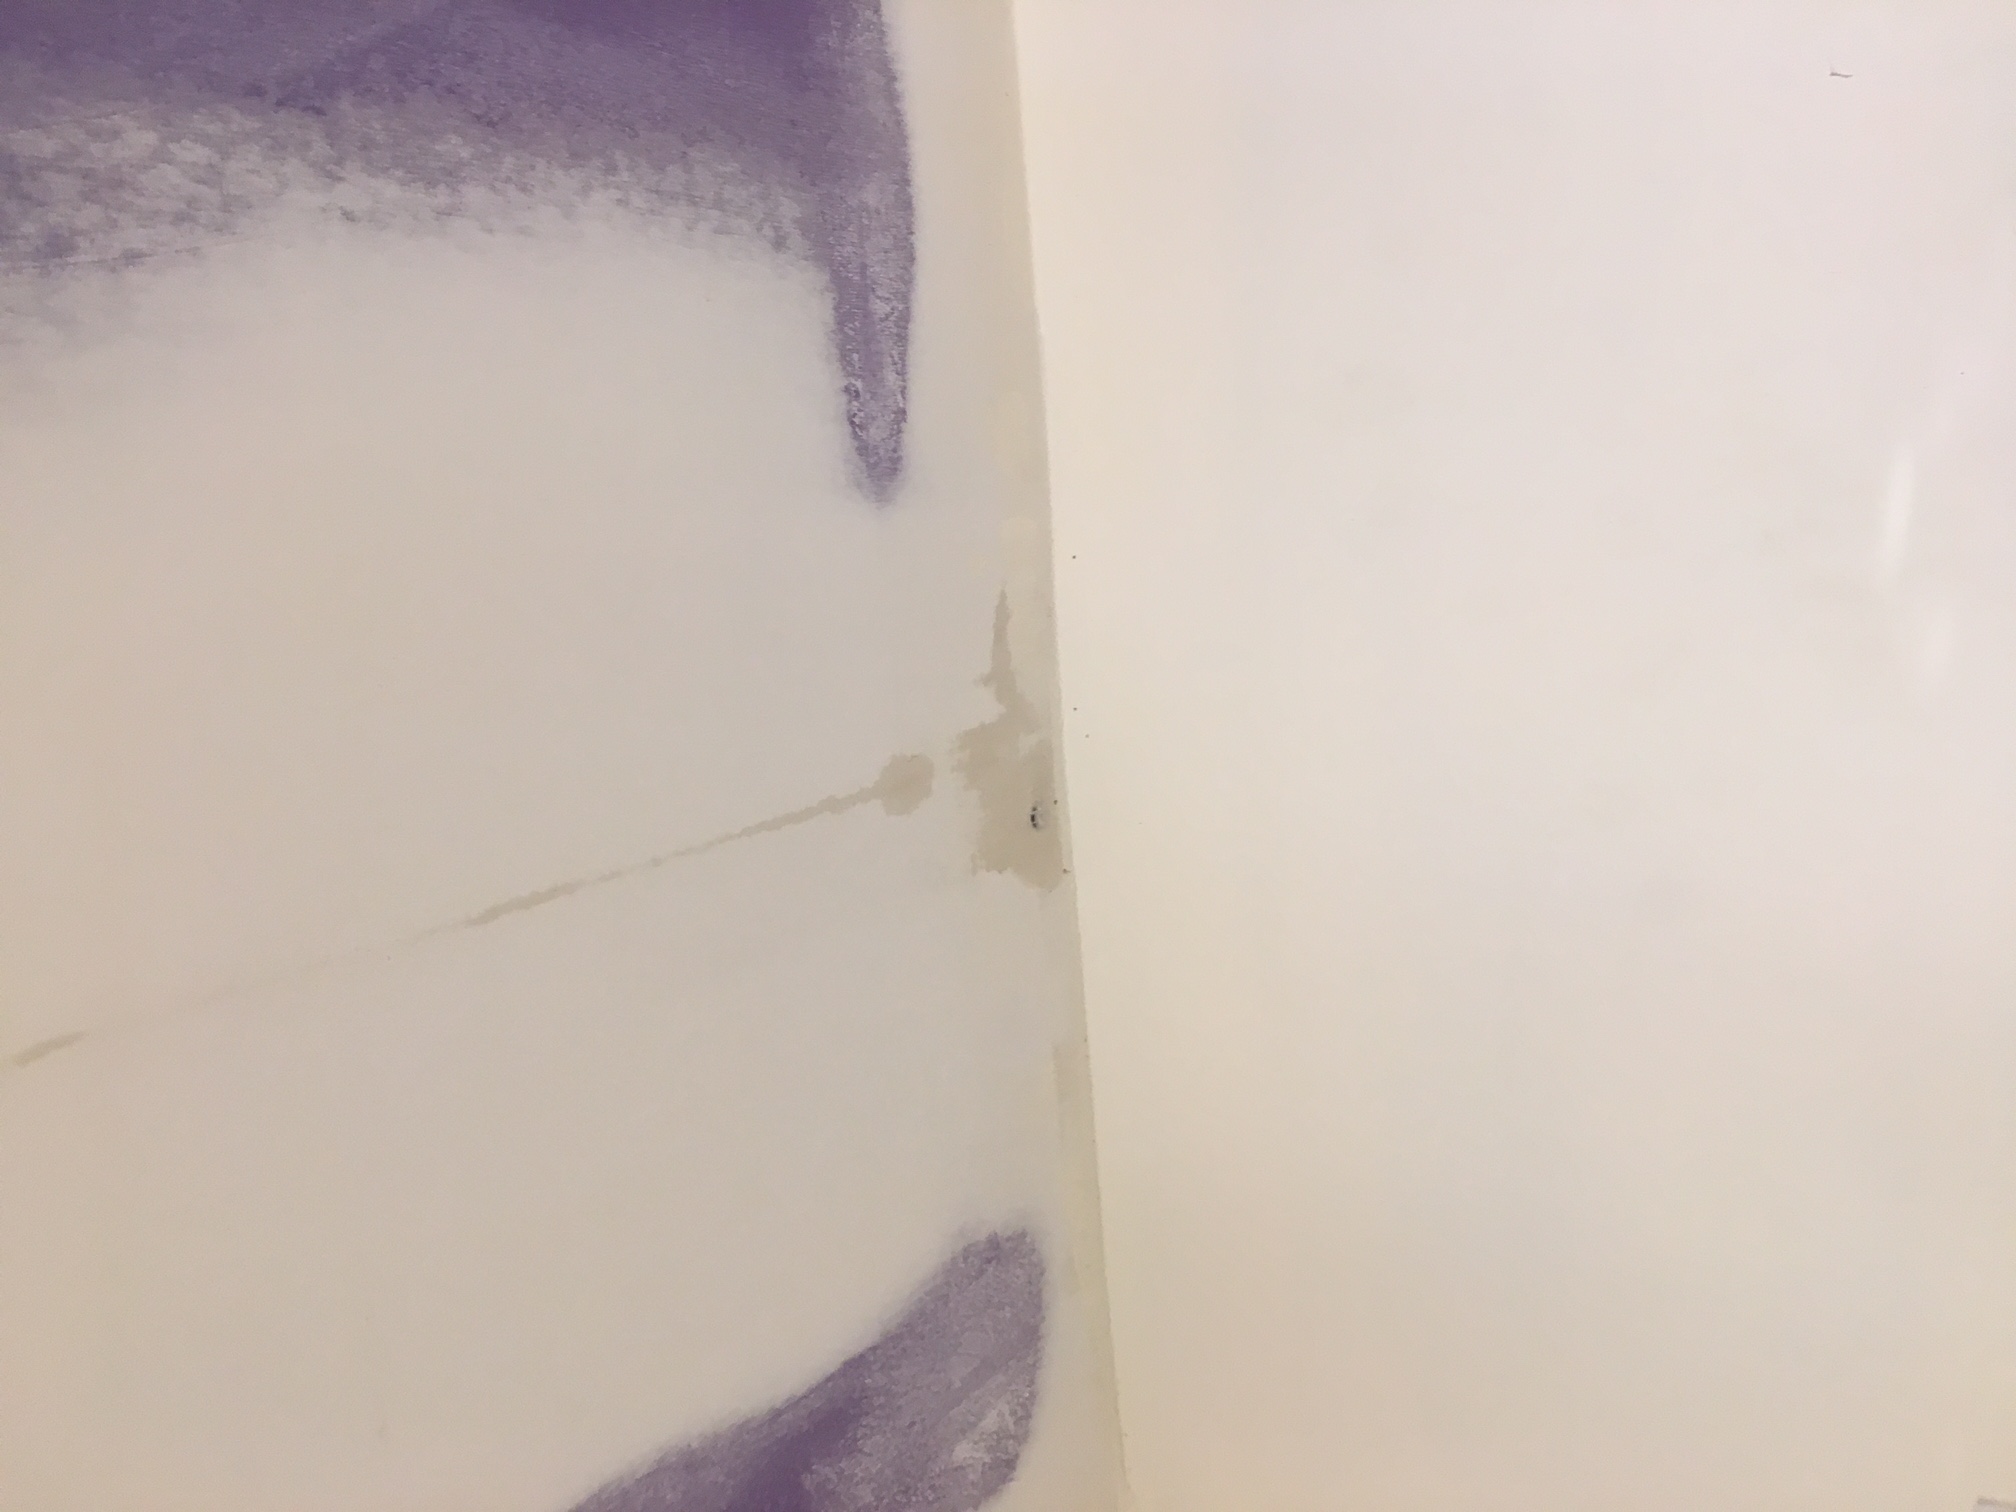 They didn't care that my new bathroom leaked through the new purple board "dry wall" nor did they inspect anything. 